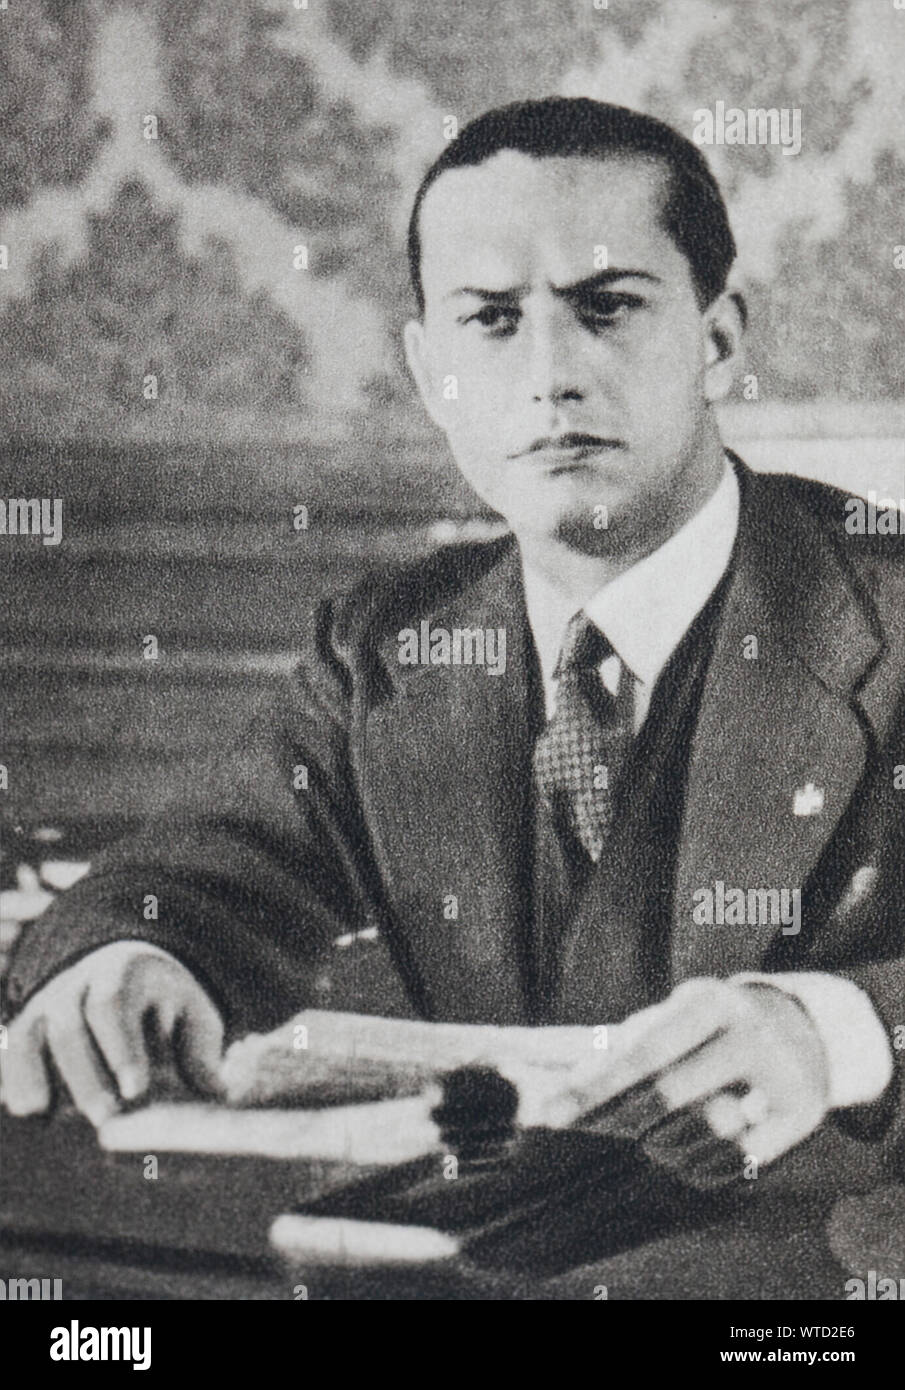 Count Galeazzo Ciano (1903 – 1944) was an Italian politician who served as Foreign Minister in the government of his father-in-law, Benito Mussolini, Stock Photo